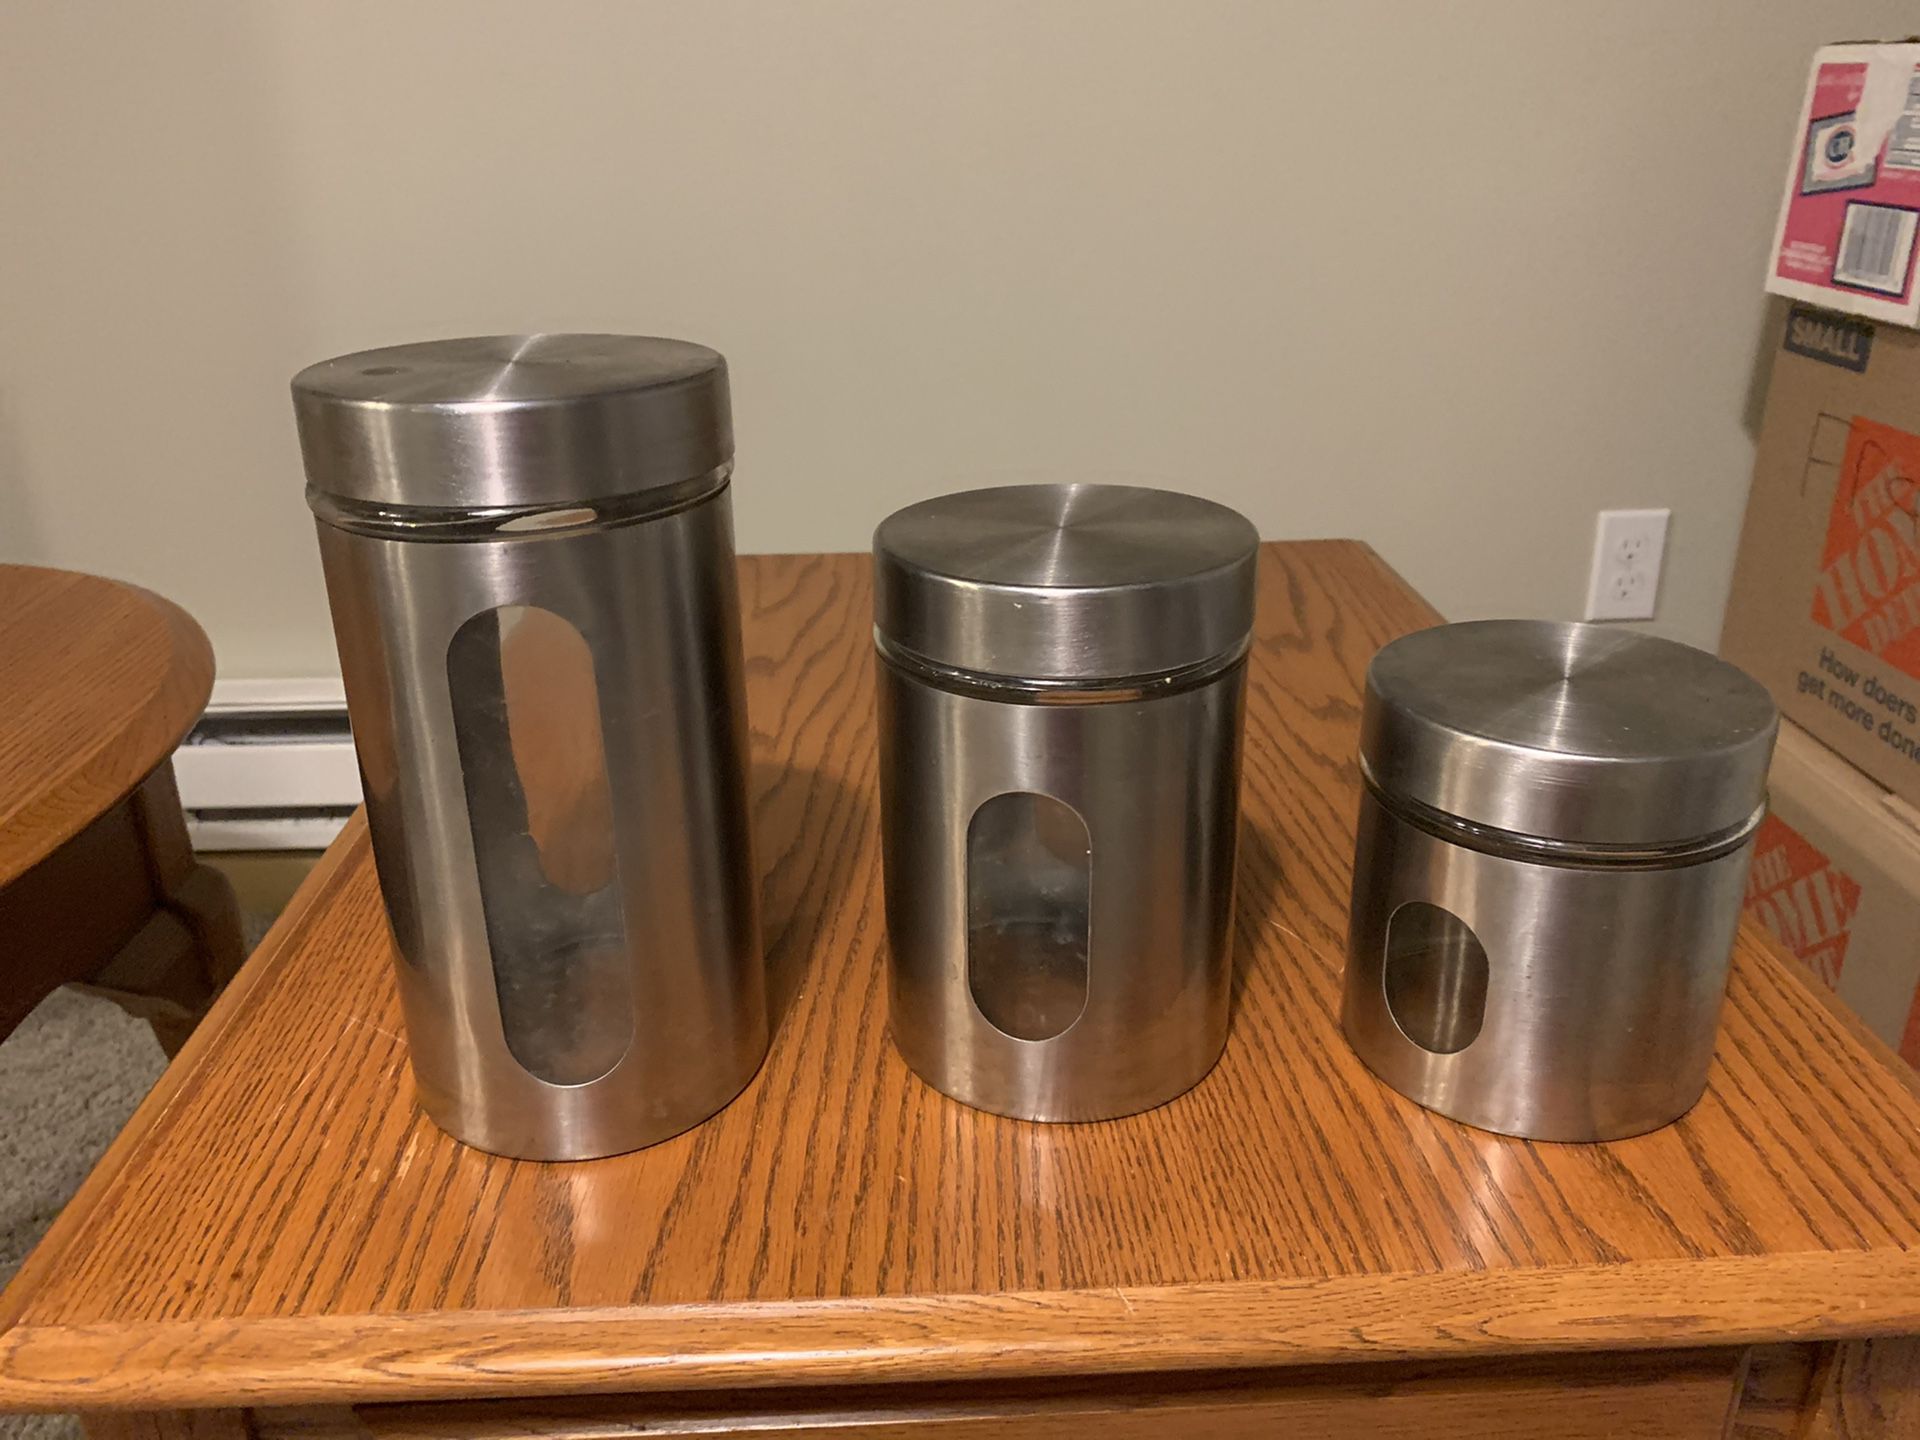 See-through canisters.